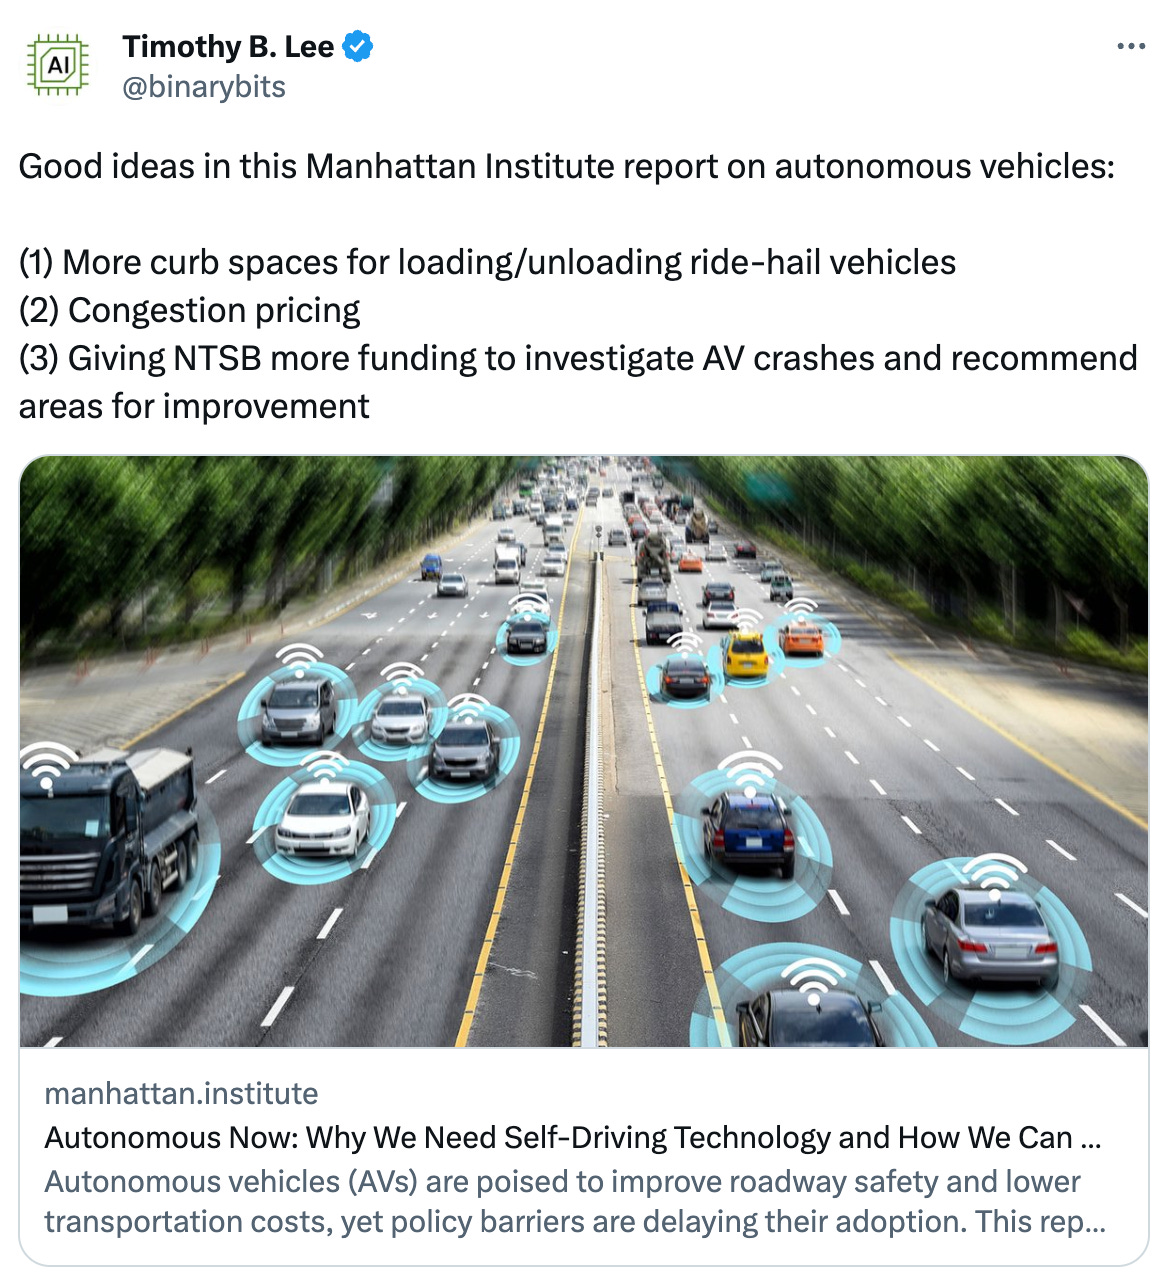  Timothy B. Lee @binarybits Good ideas in this Manhattan Institute report on autonomous vehicles:   (1) More curb spaces for loading/unloading ride-hail vehicles (2) Congestion pricing (3) Giving NTSB more funding to investigate AV crashes and recommend areas for improvement manhattan.institute Autonomous Now: Why We Need Self-Driving Technology and How We Can Get It Faster Autonomous vehicles (AVs) are poised to improve roadway safety and lower transportation costs, yet policy barriers are delaying their adoption. This report focuses on the two AV applications—autono...